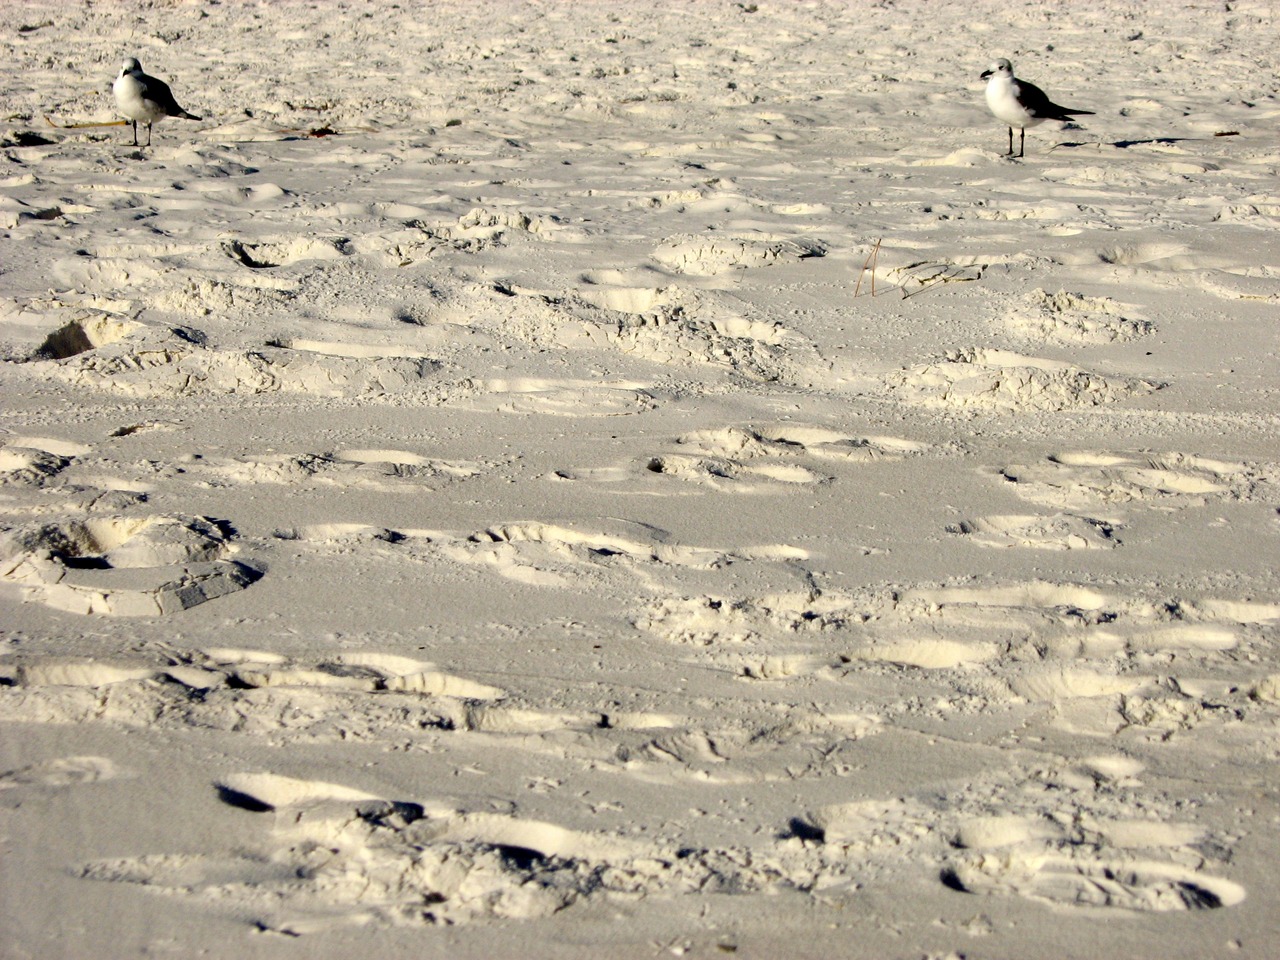 Two seagulls on the beach behind Silver Shells Resort.